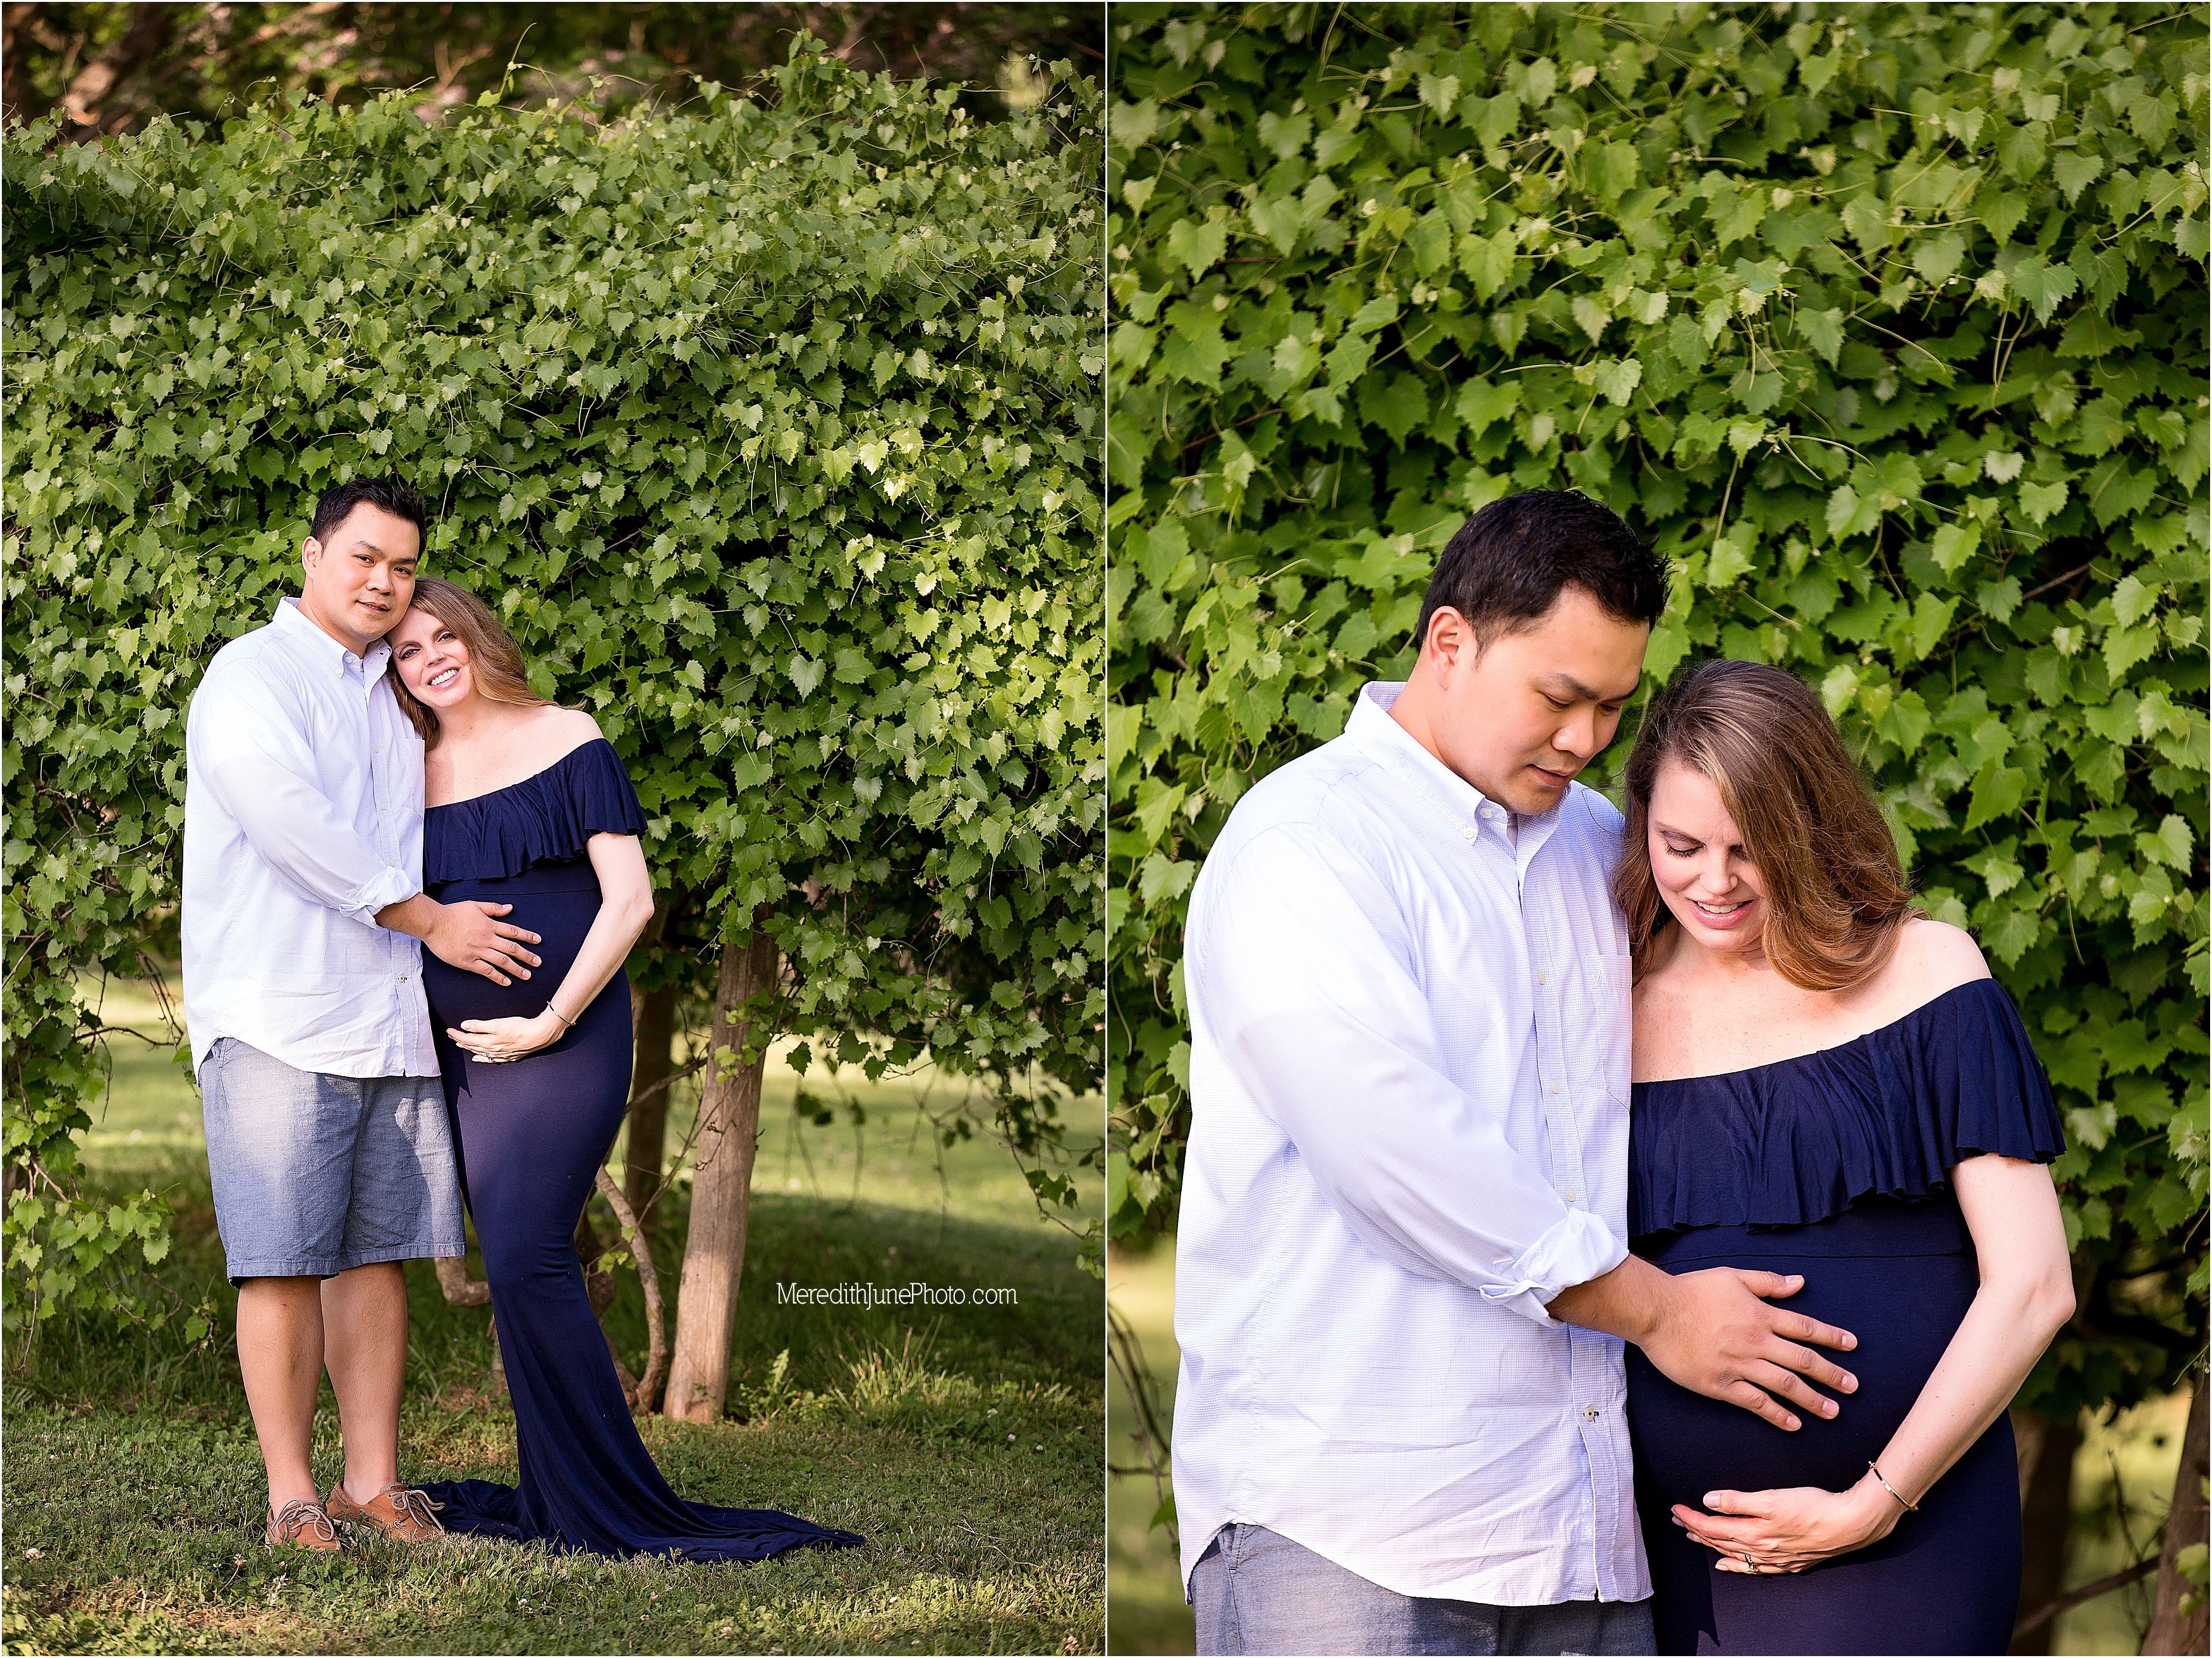 Keovialey maternity photo session at Anne Springs Greenway by Meredith June Photography 